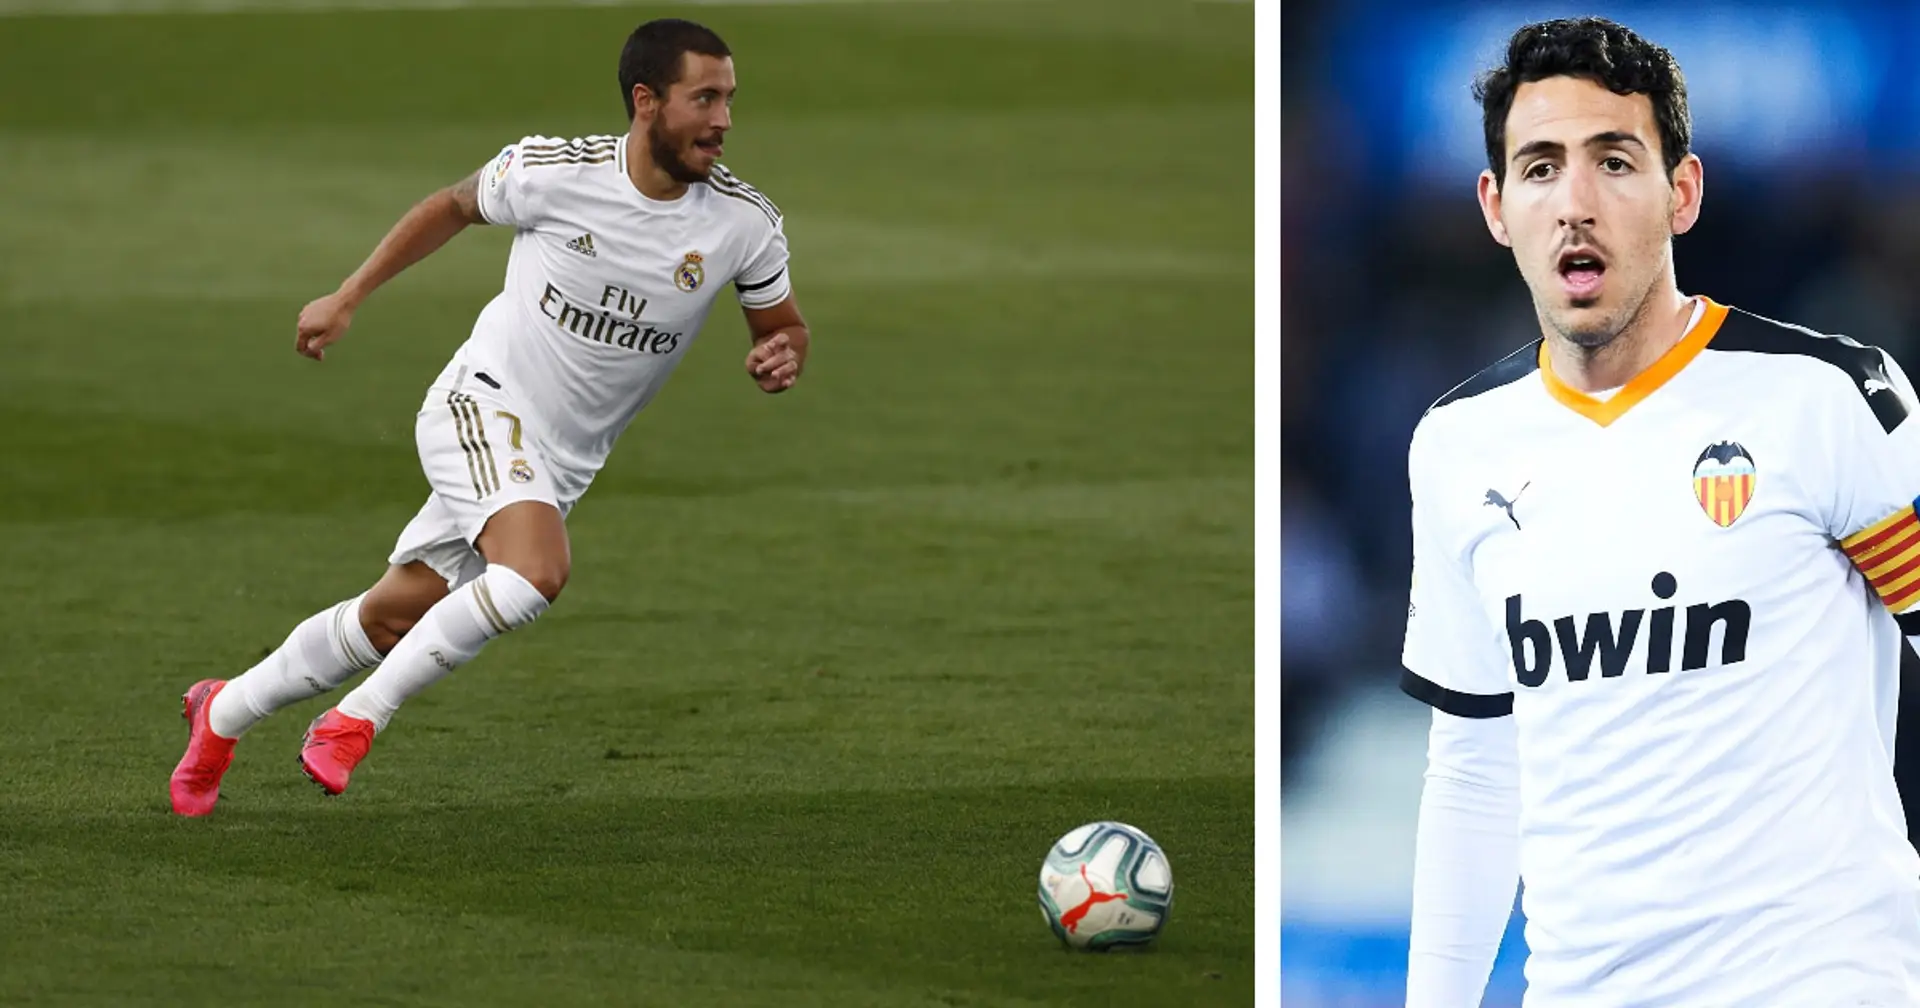 La Liga title chase, Hazard's form and other 3 strong reasons why Madrid must beat Valencia